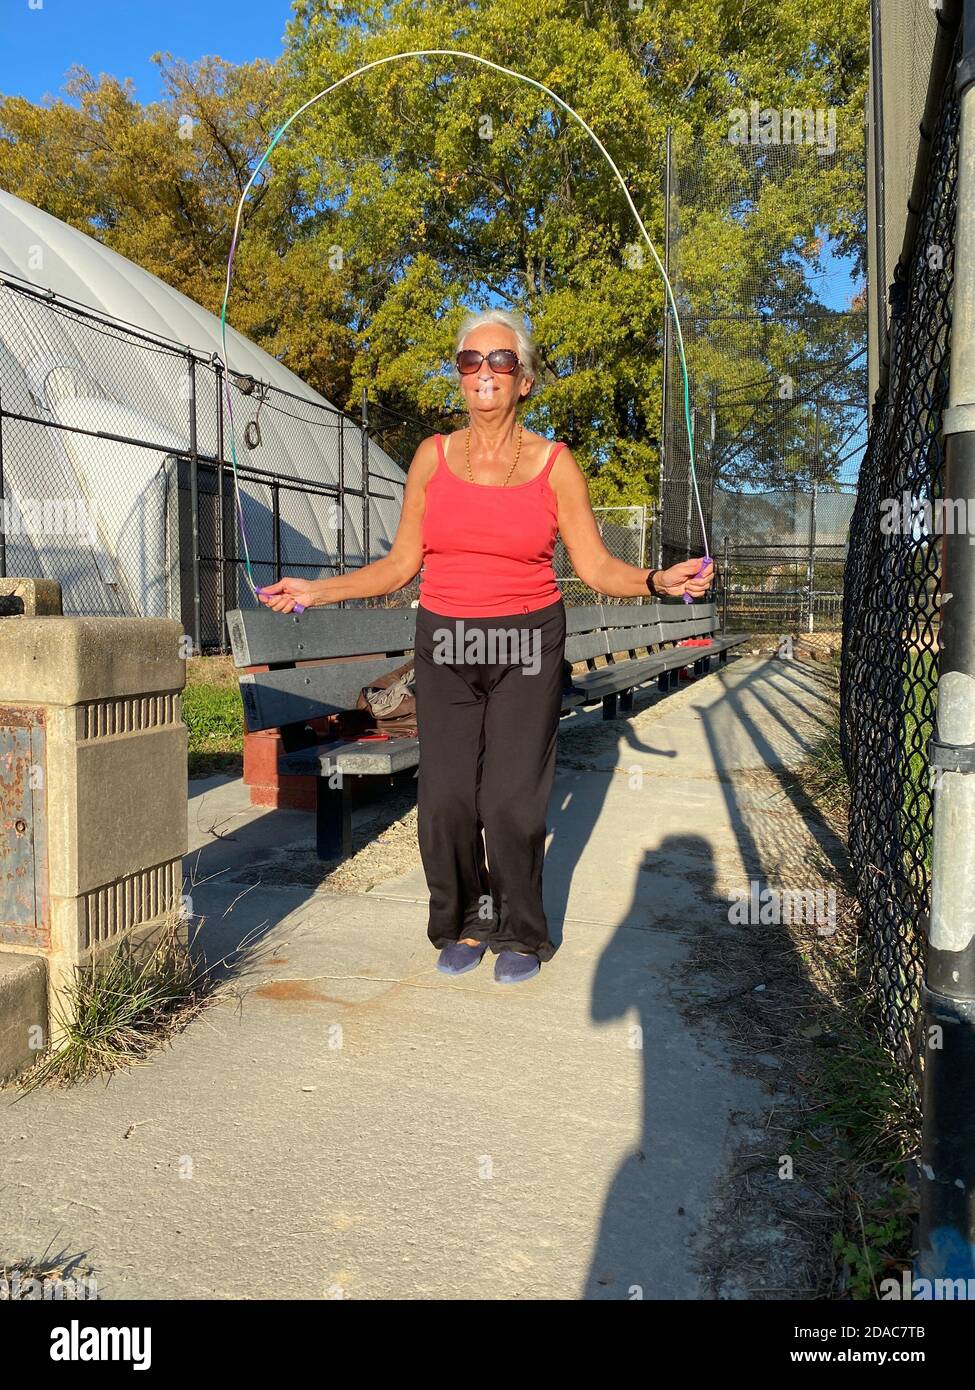 70 year old woman stays in good shape jump roping in the park in Brooklyn, New Yortk. Stock Photo